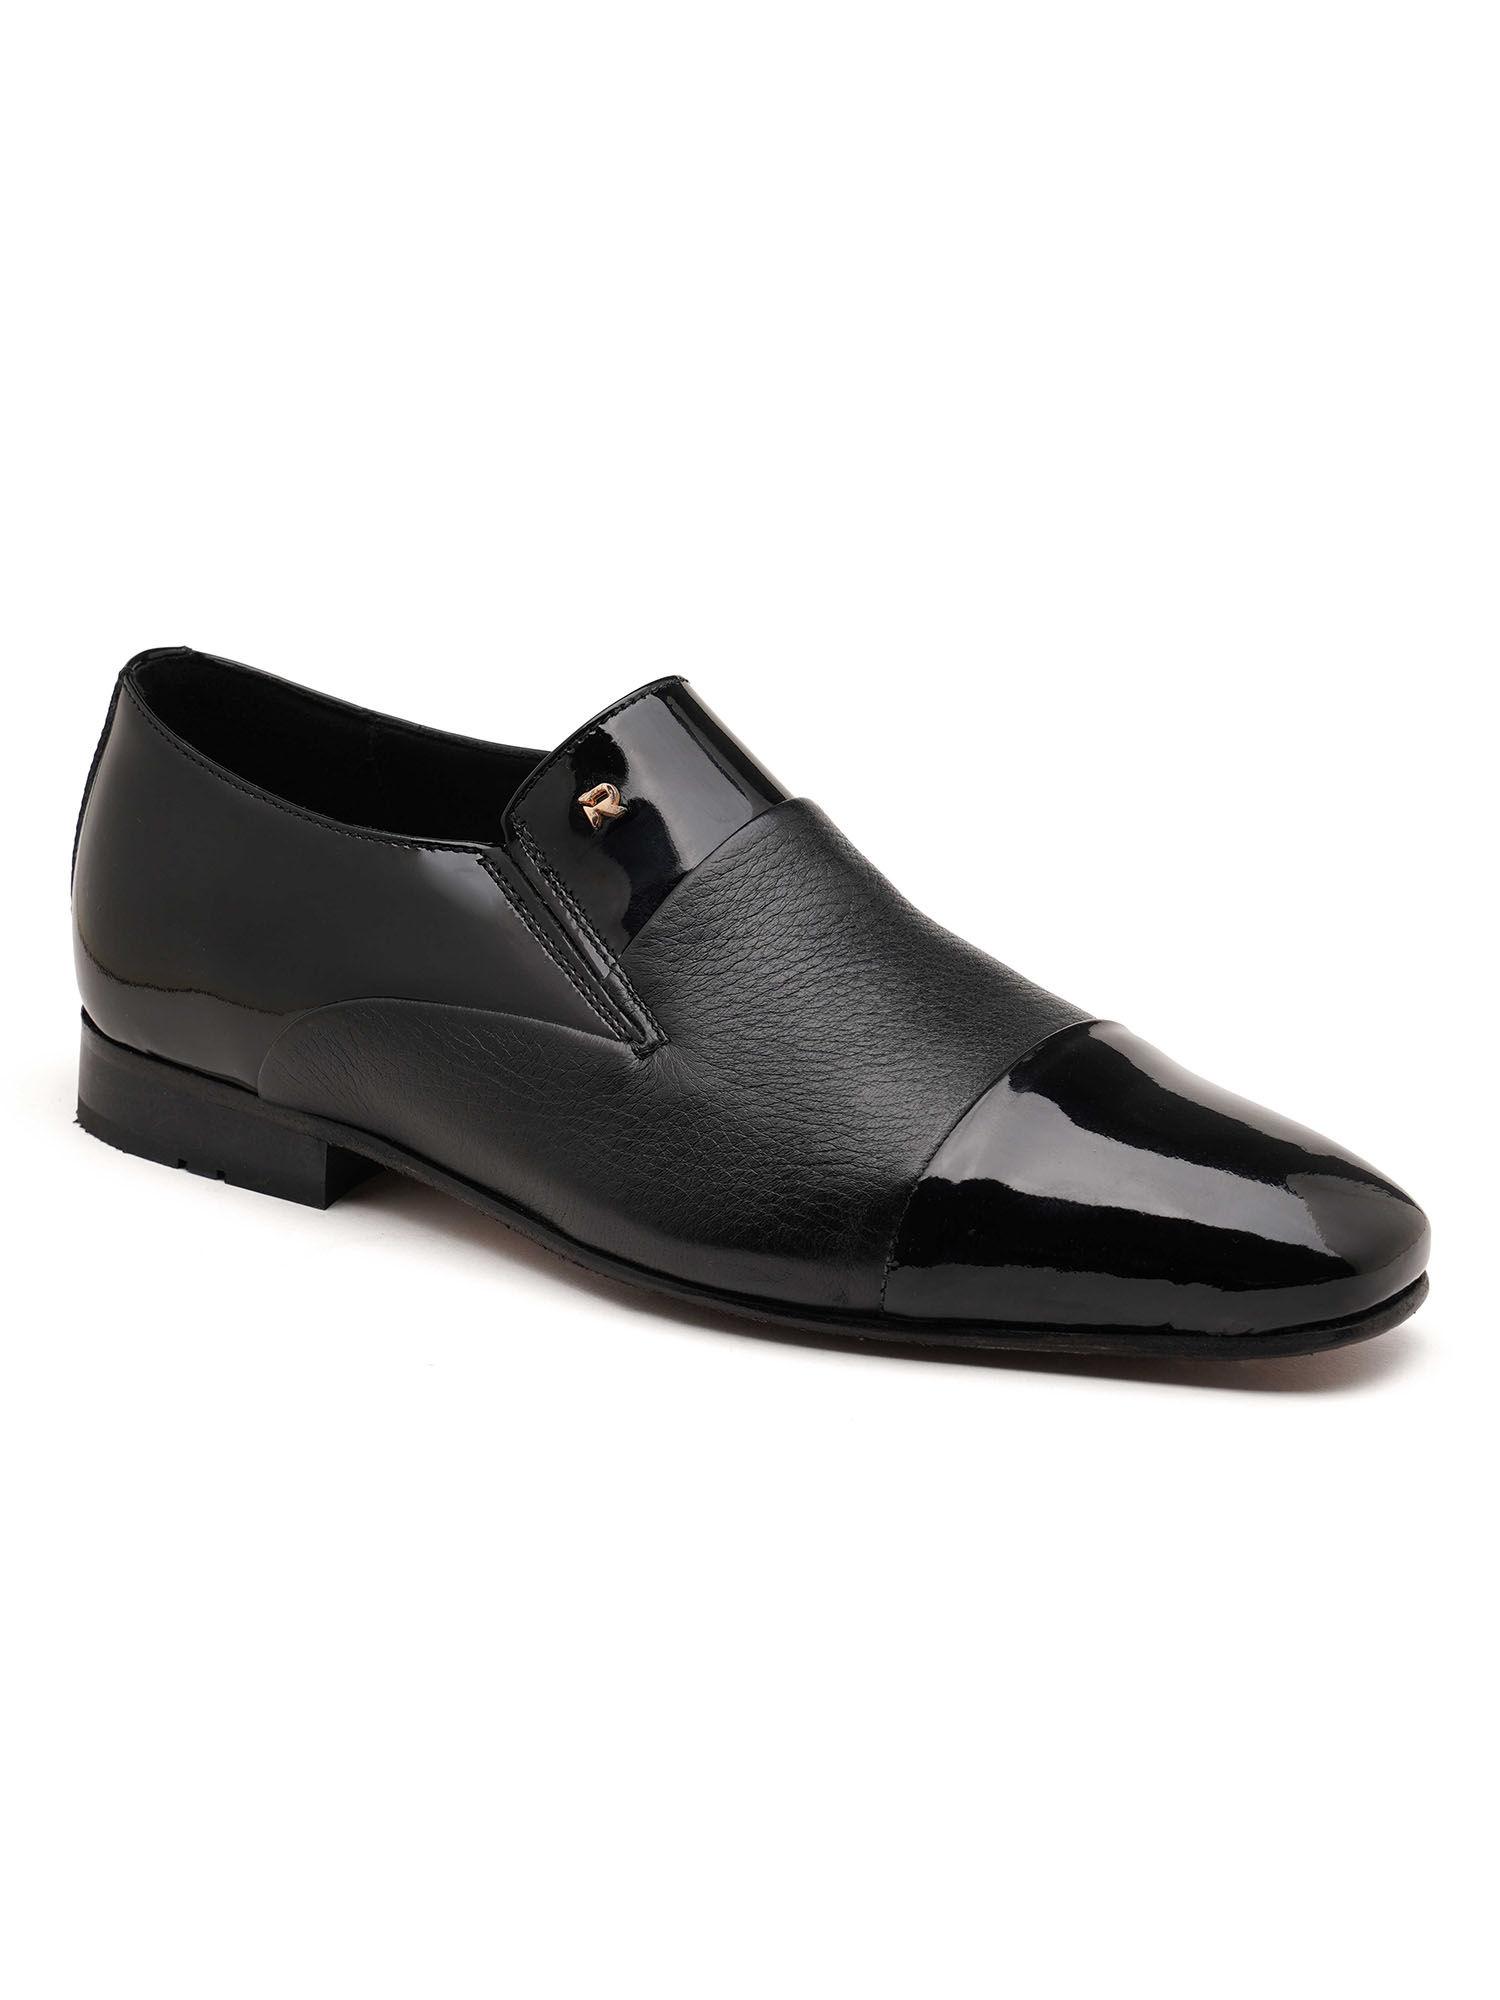 black-occasion-slip-on-loafers